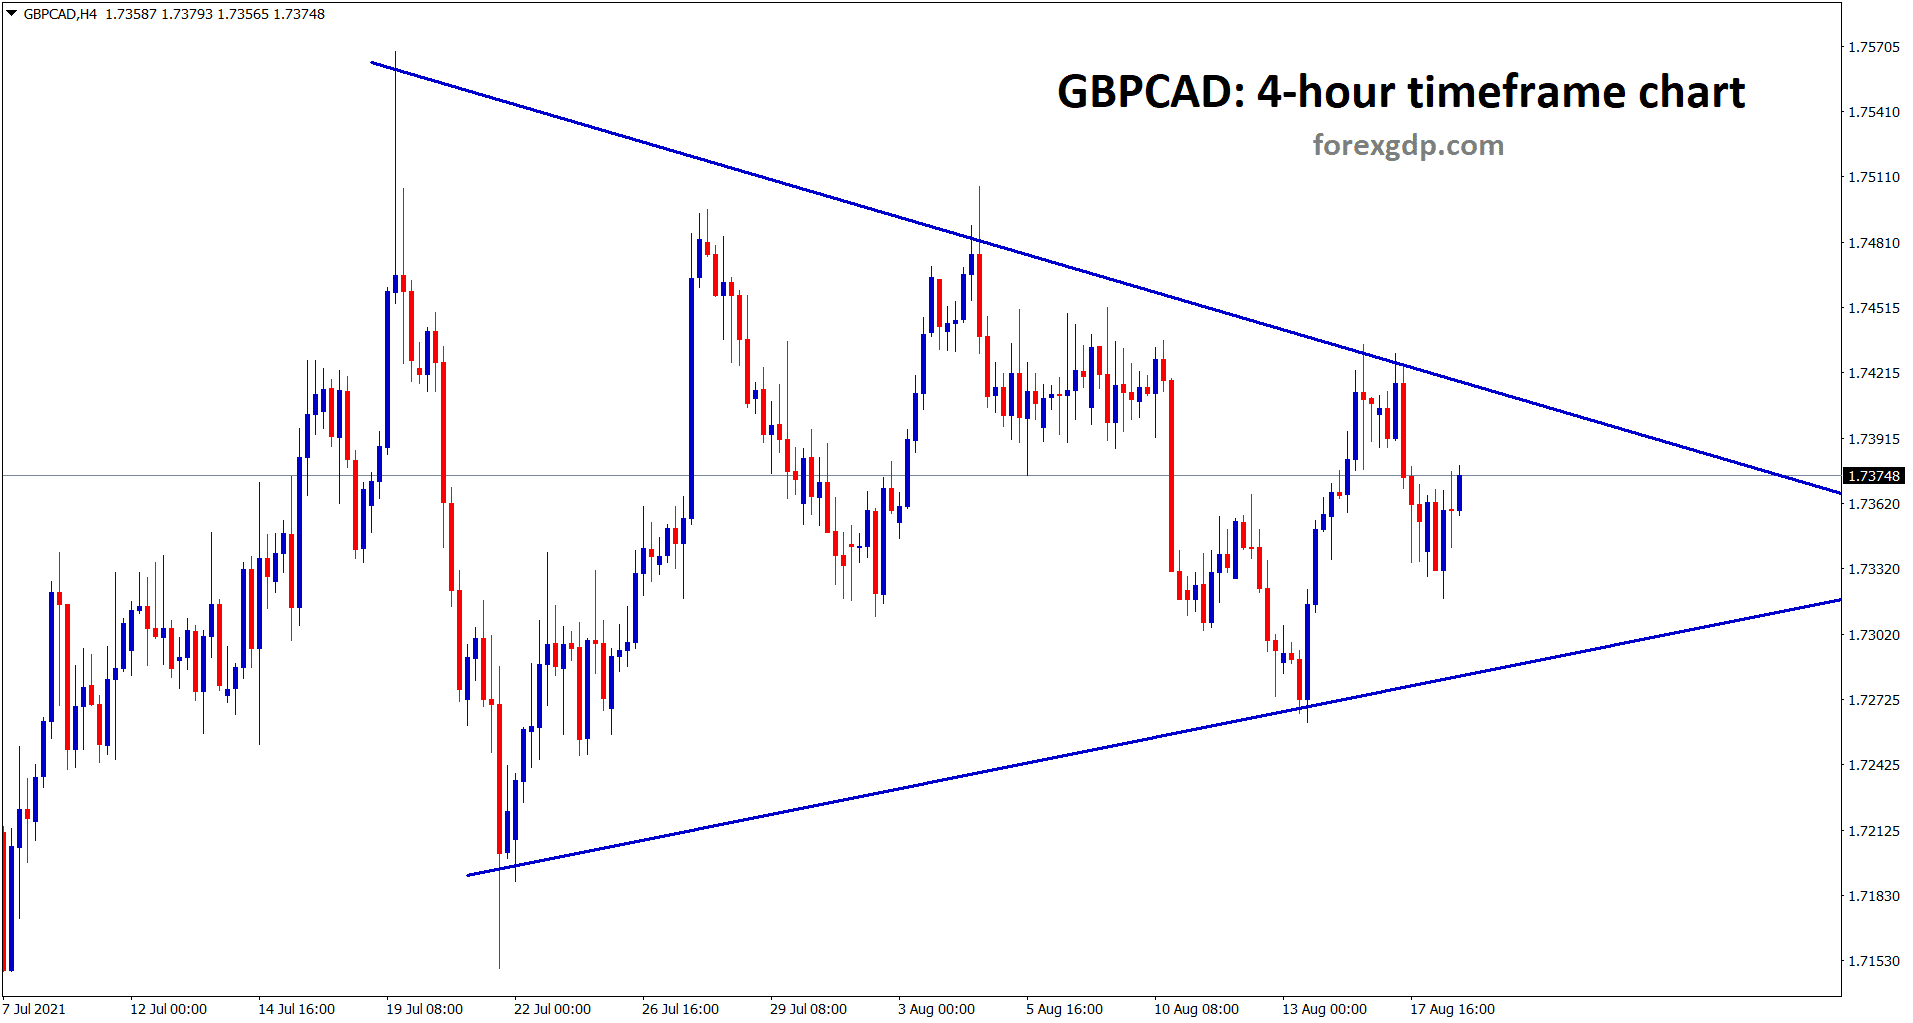 GBPCAD has formed a symmetrical triangle pattern market going to break this triangle soon as it getting narrower.